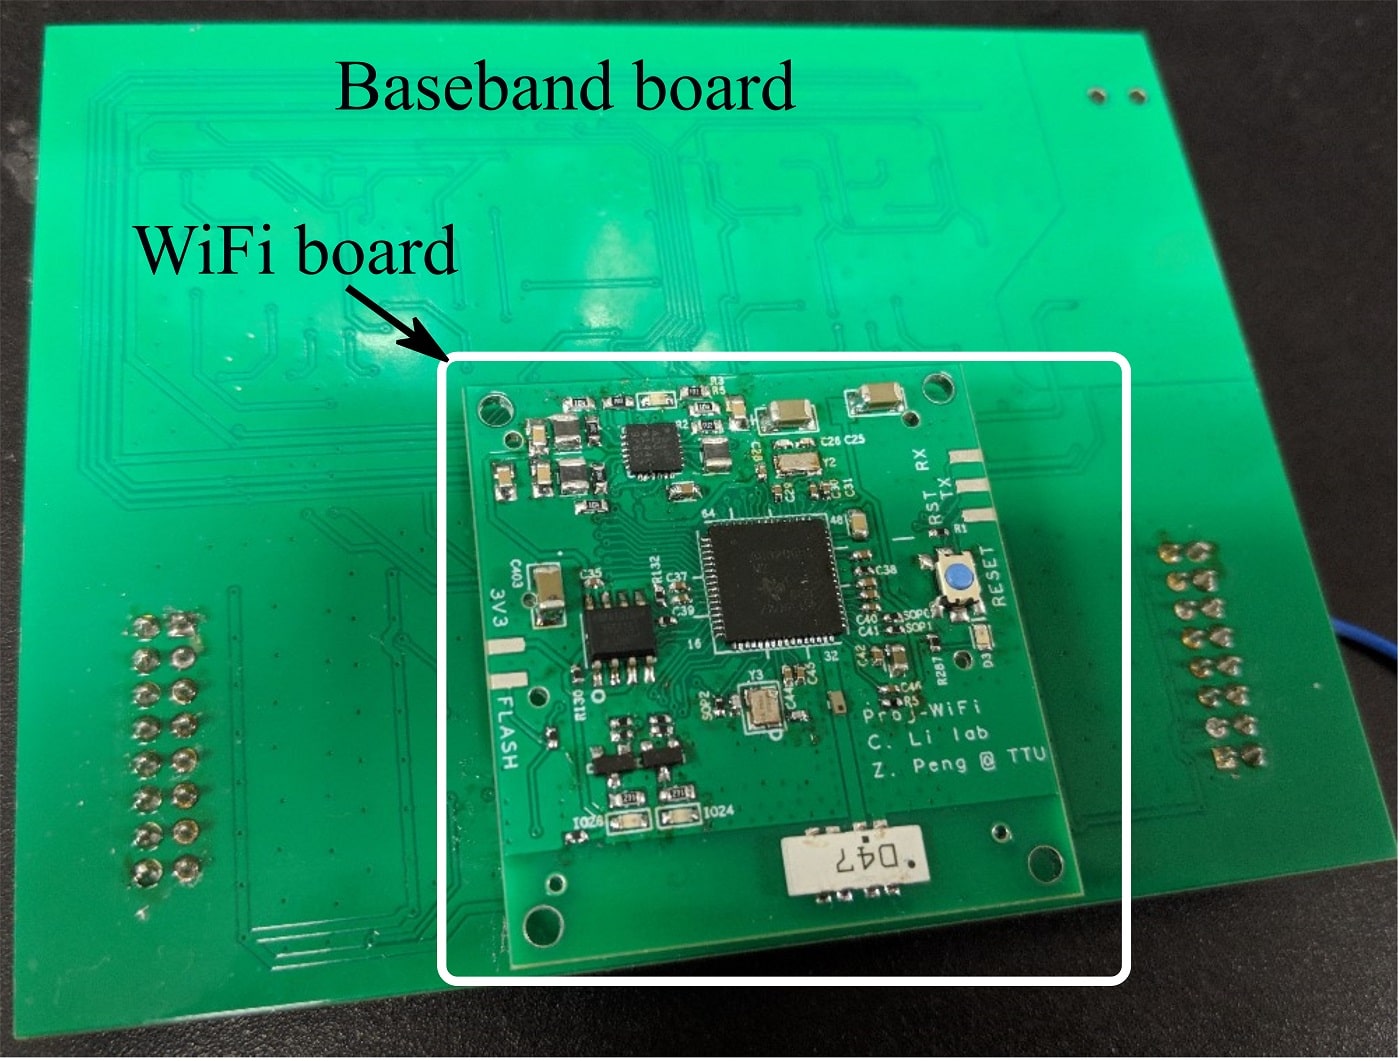 Fig. 5. Photo of the back of the baseband board with stacked WiFi board